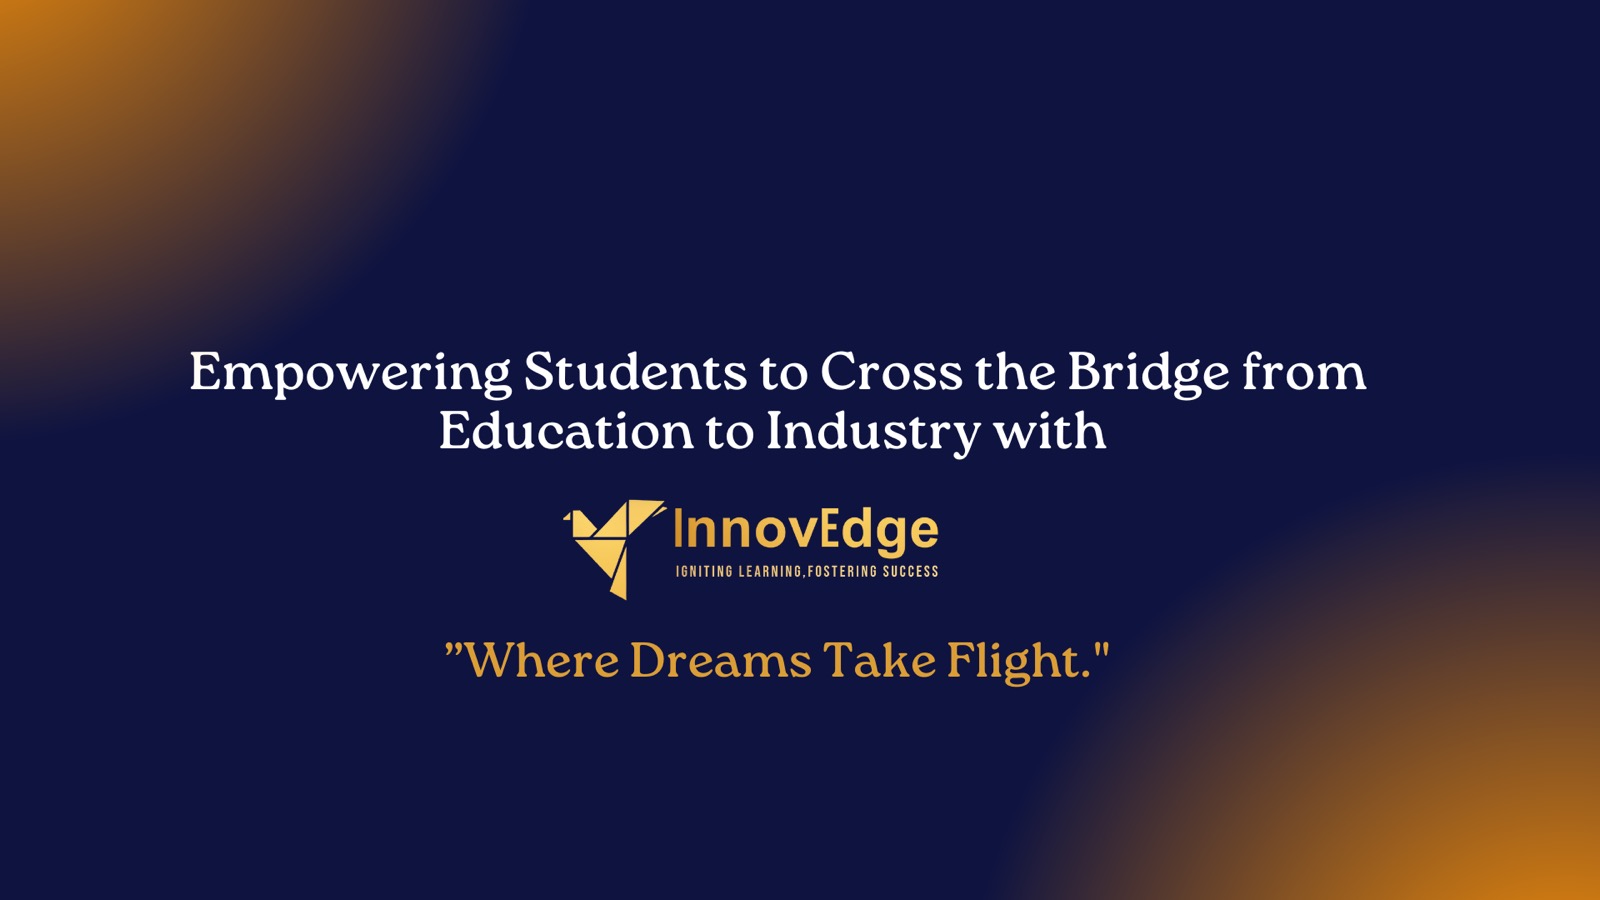 InnovEdge - Industry and Education platform